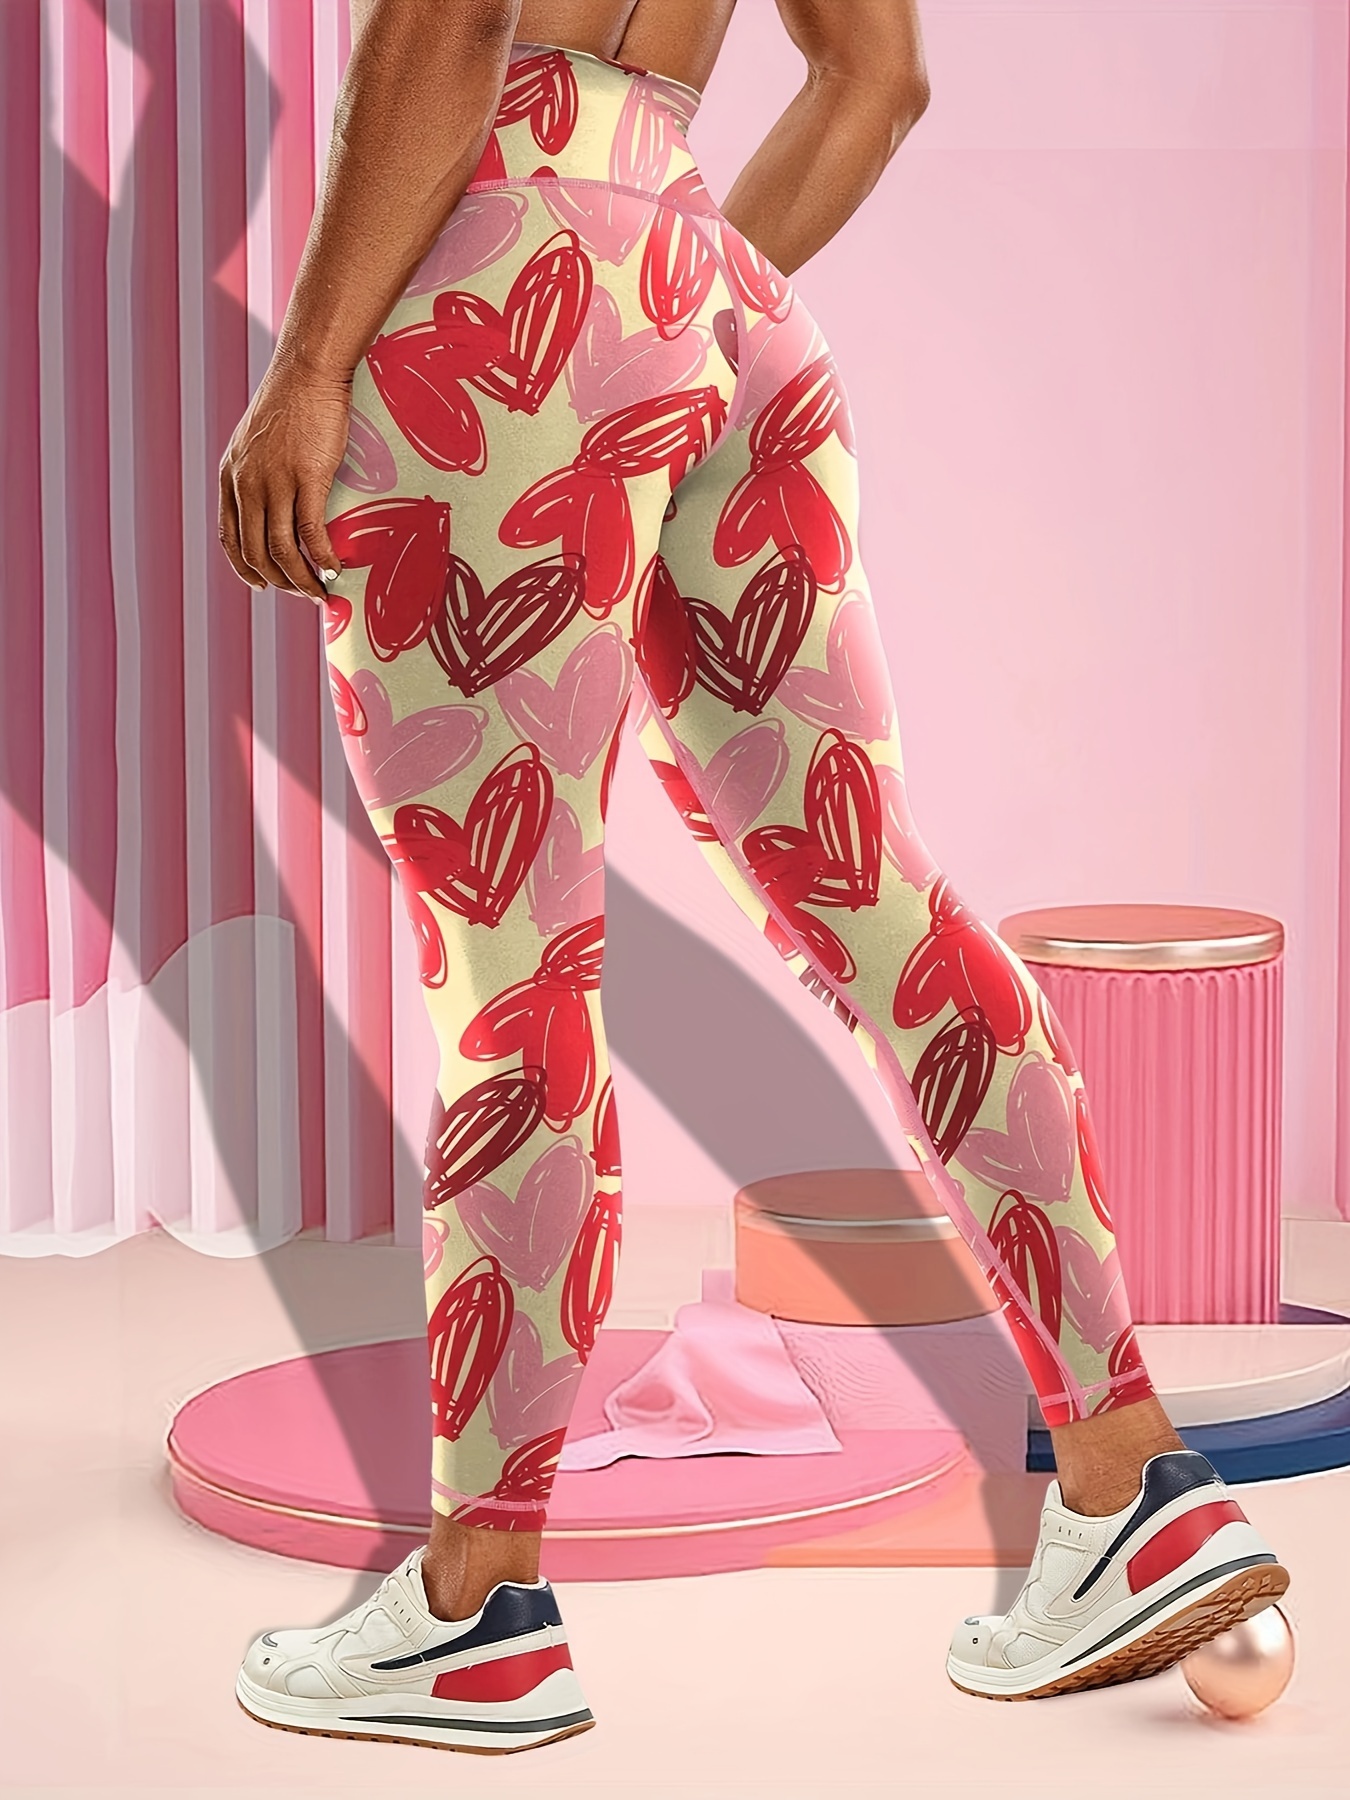 twifer valentines day gift sets women's legging women yoga leggings  valentine day printing casual comfortable home leggings